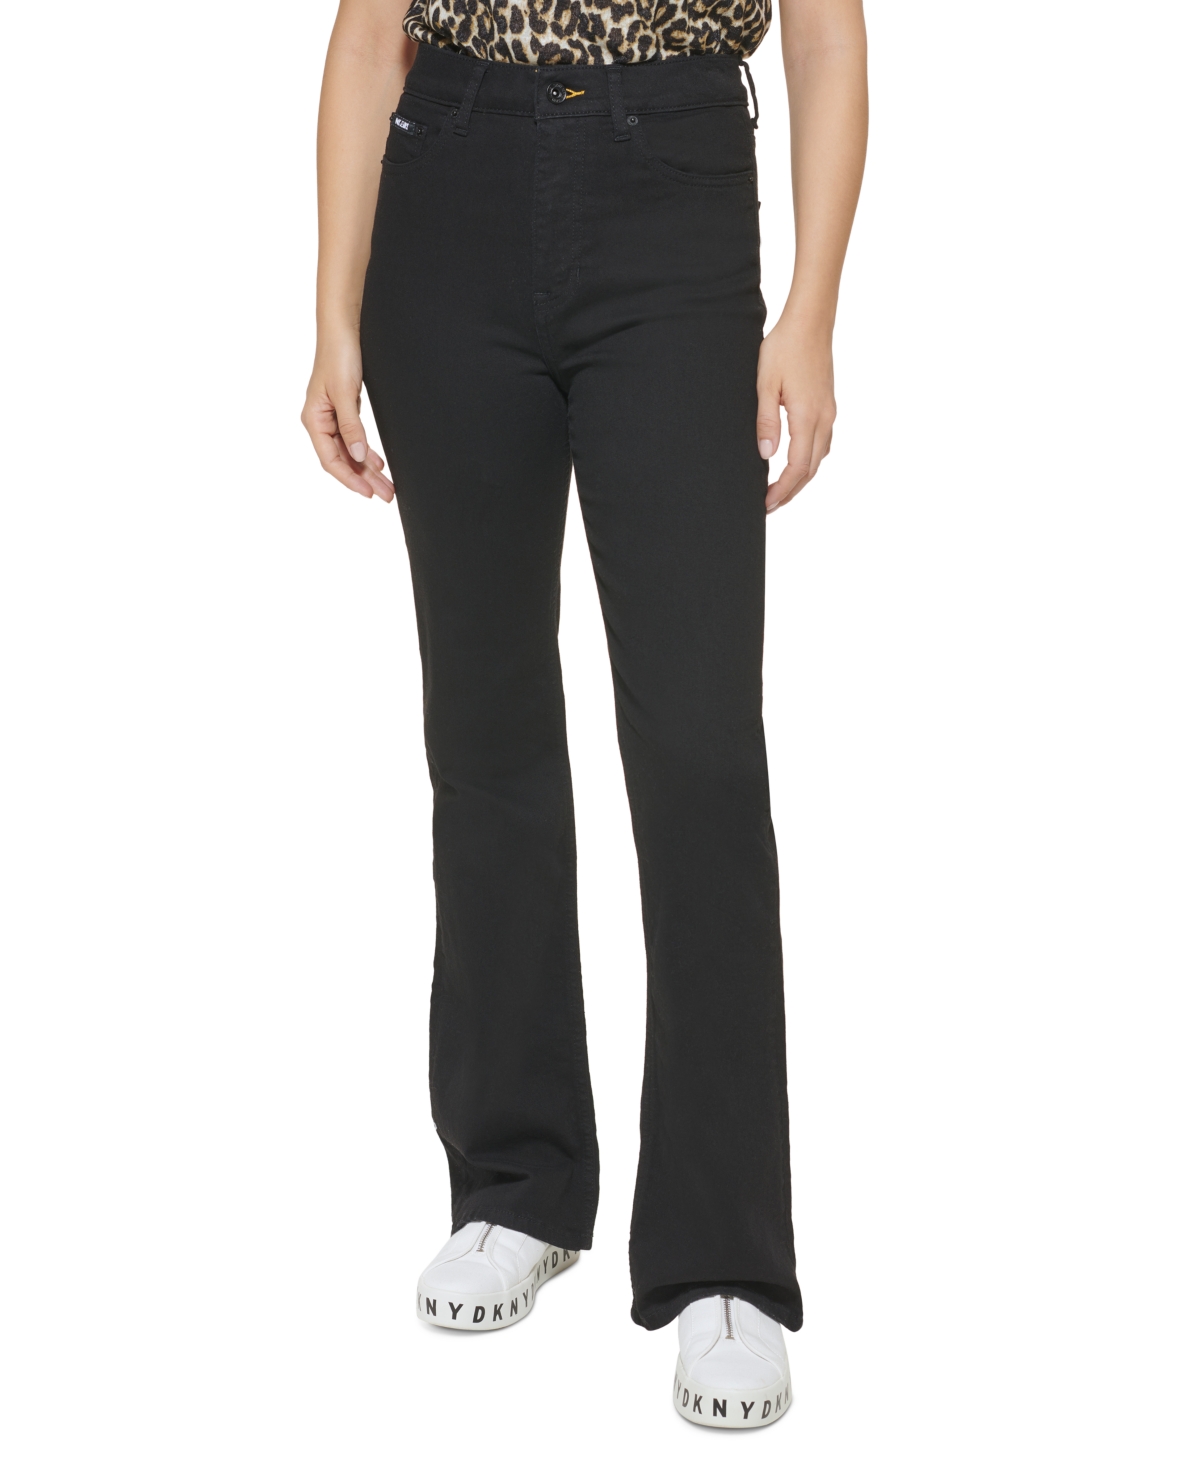 Dkny Jeans Women's Boreum High-rise Flared Jeans In Rinse Black